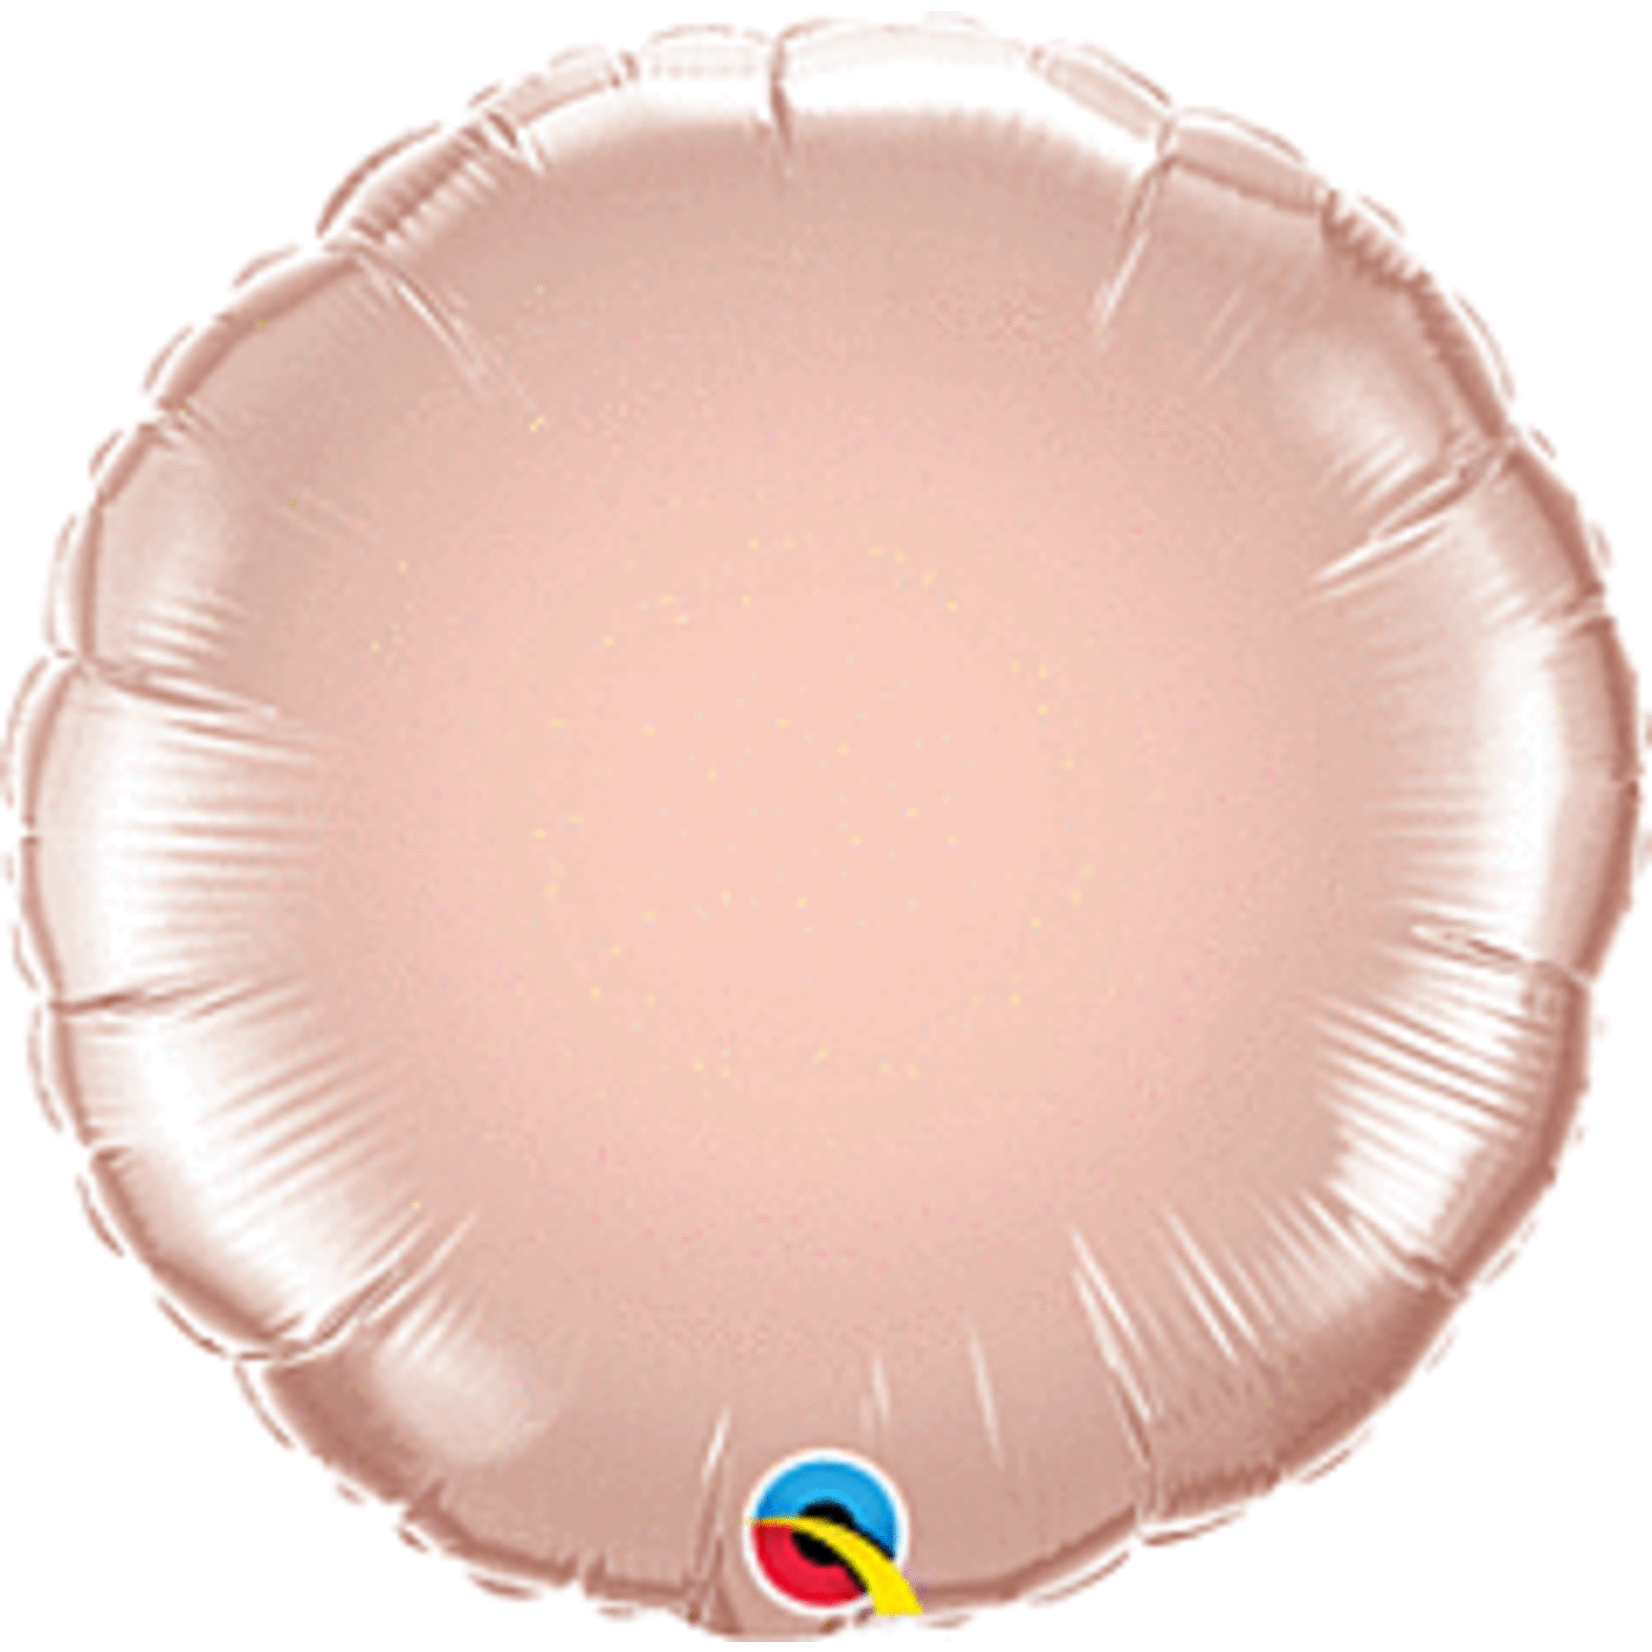 18" Rose Gold Round Foil Balloon